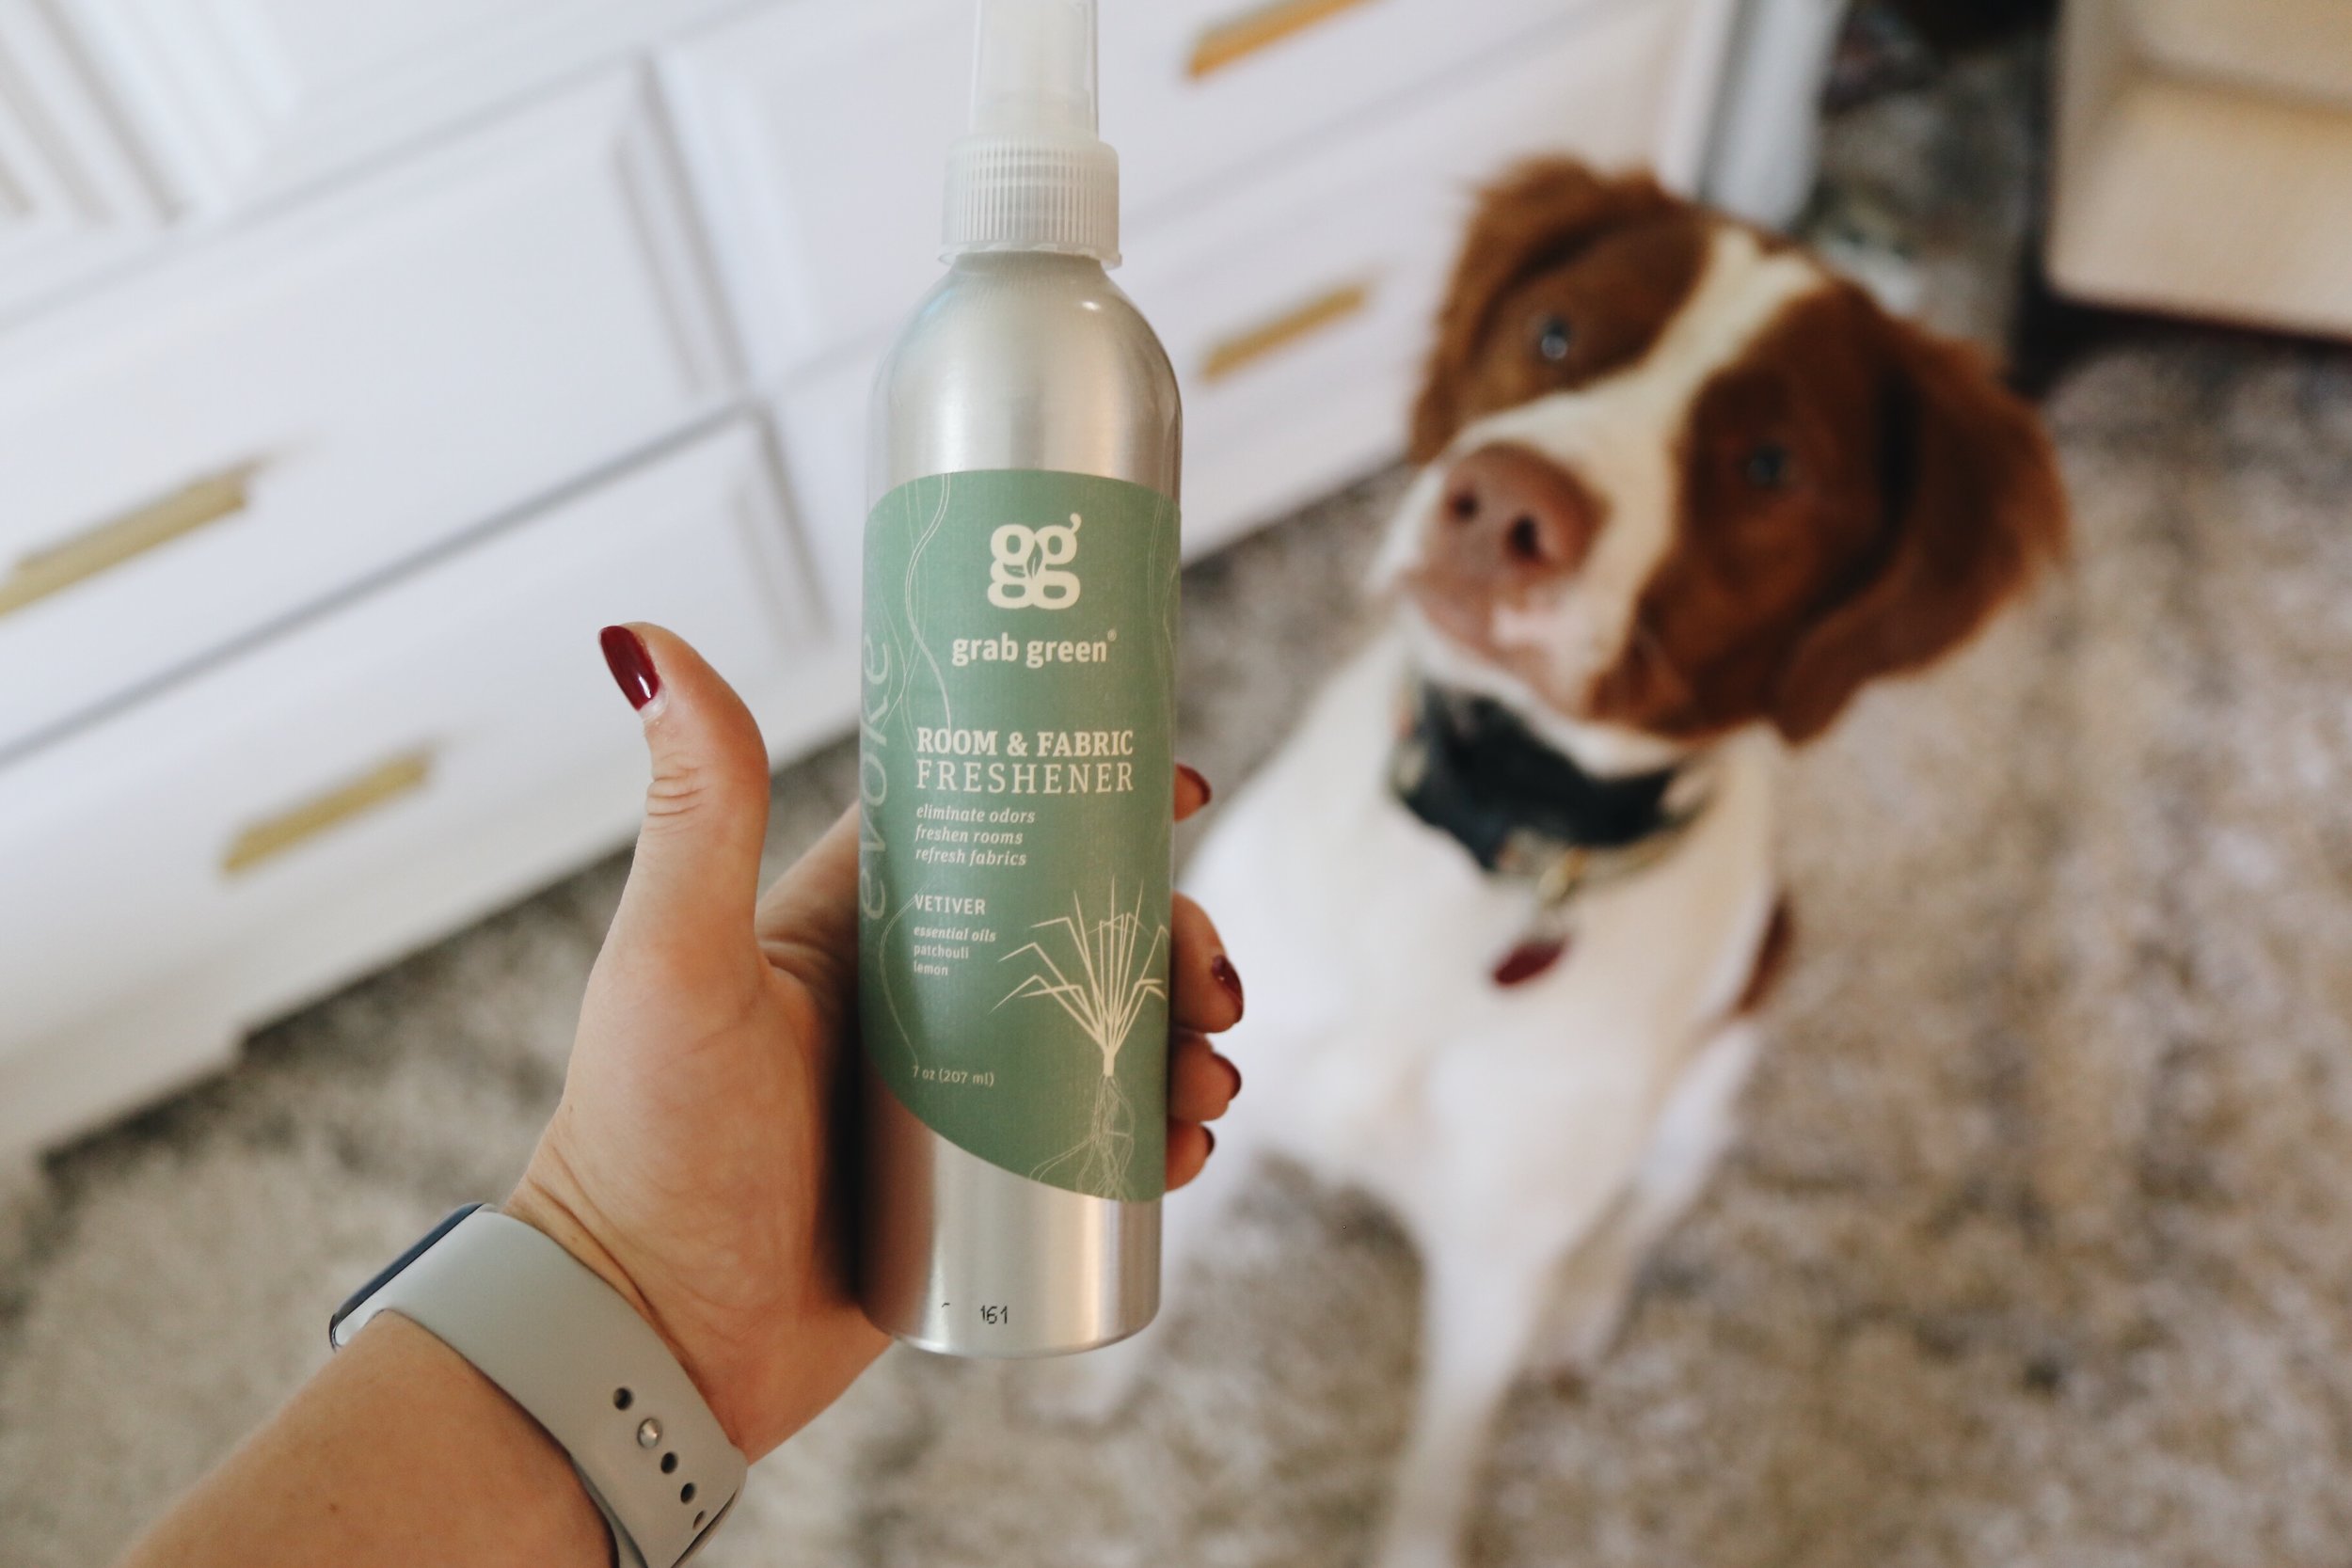  This room and fabric freshener...y'all! It has the sweetest smells, not overpowering at all but does a great job getting things fresh again without having to get carpet cleaners up in your home. Remi loves the smell, too! If you have pets, this is a